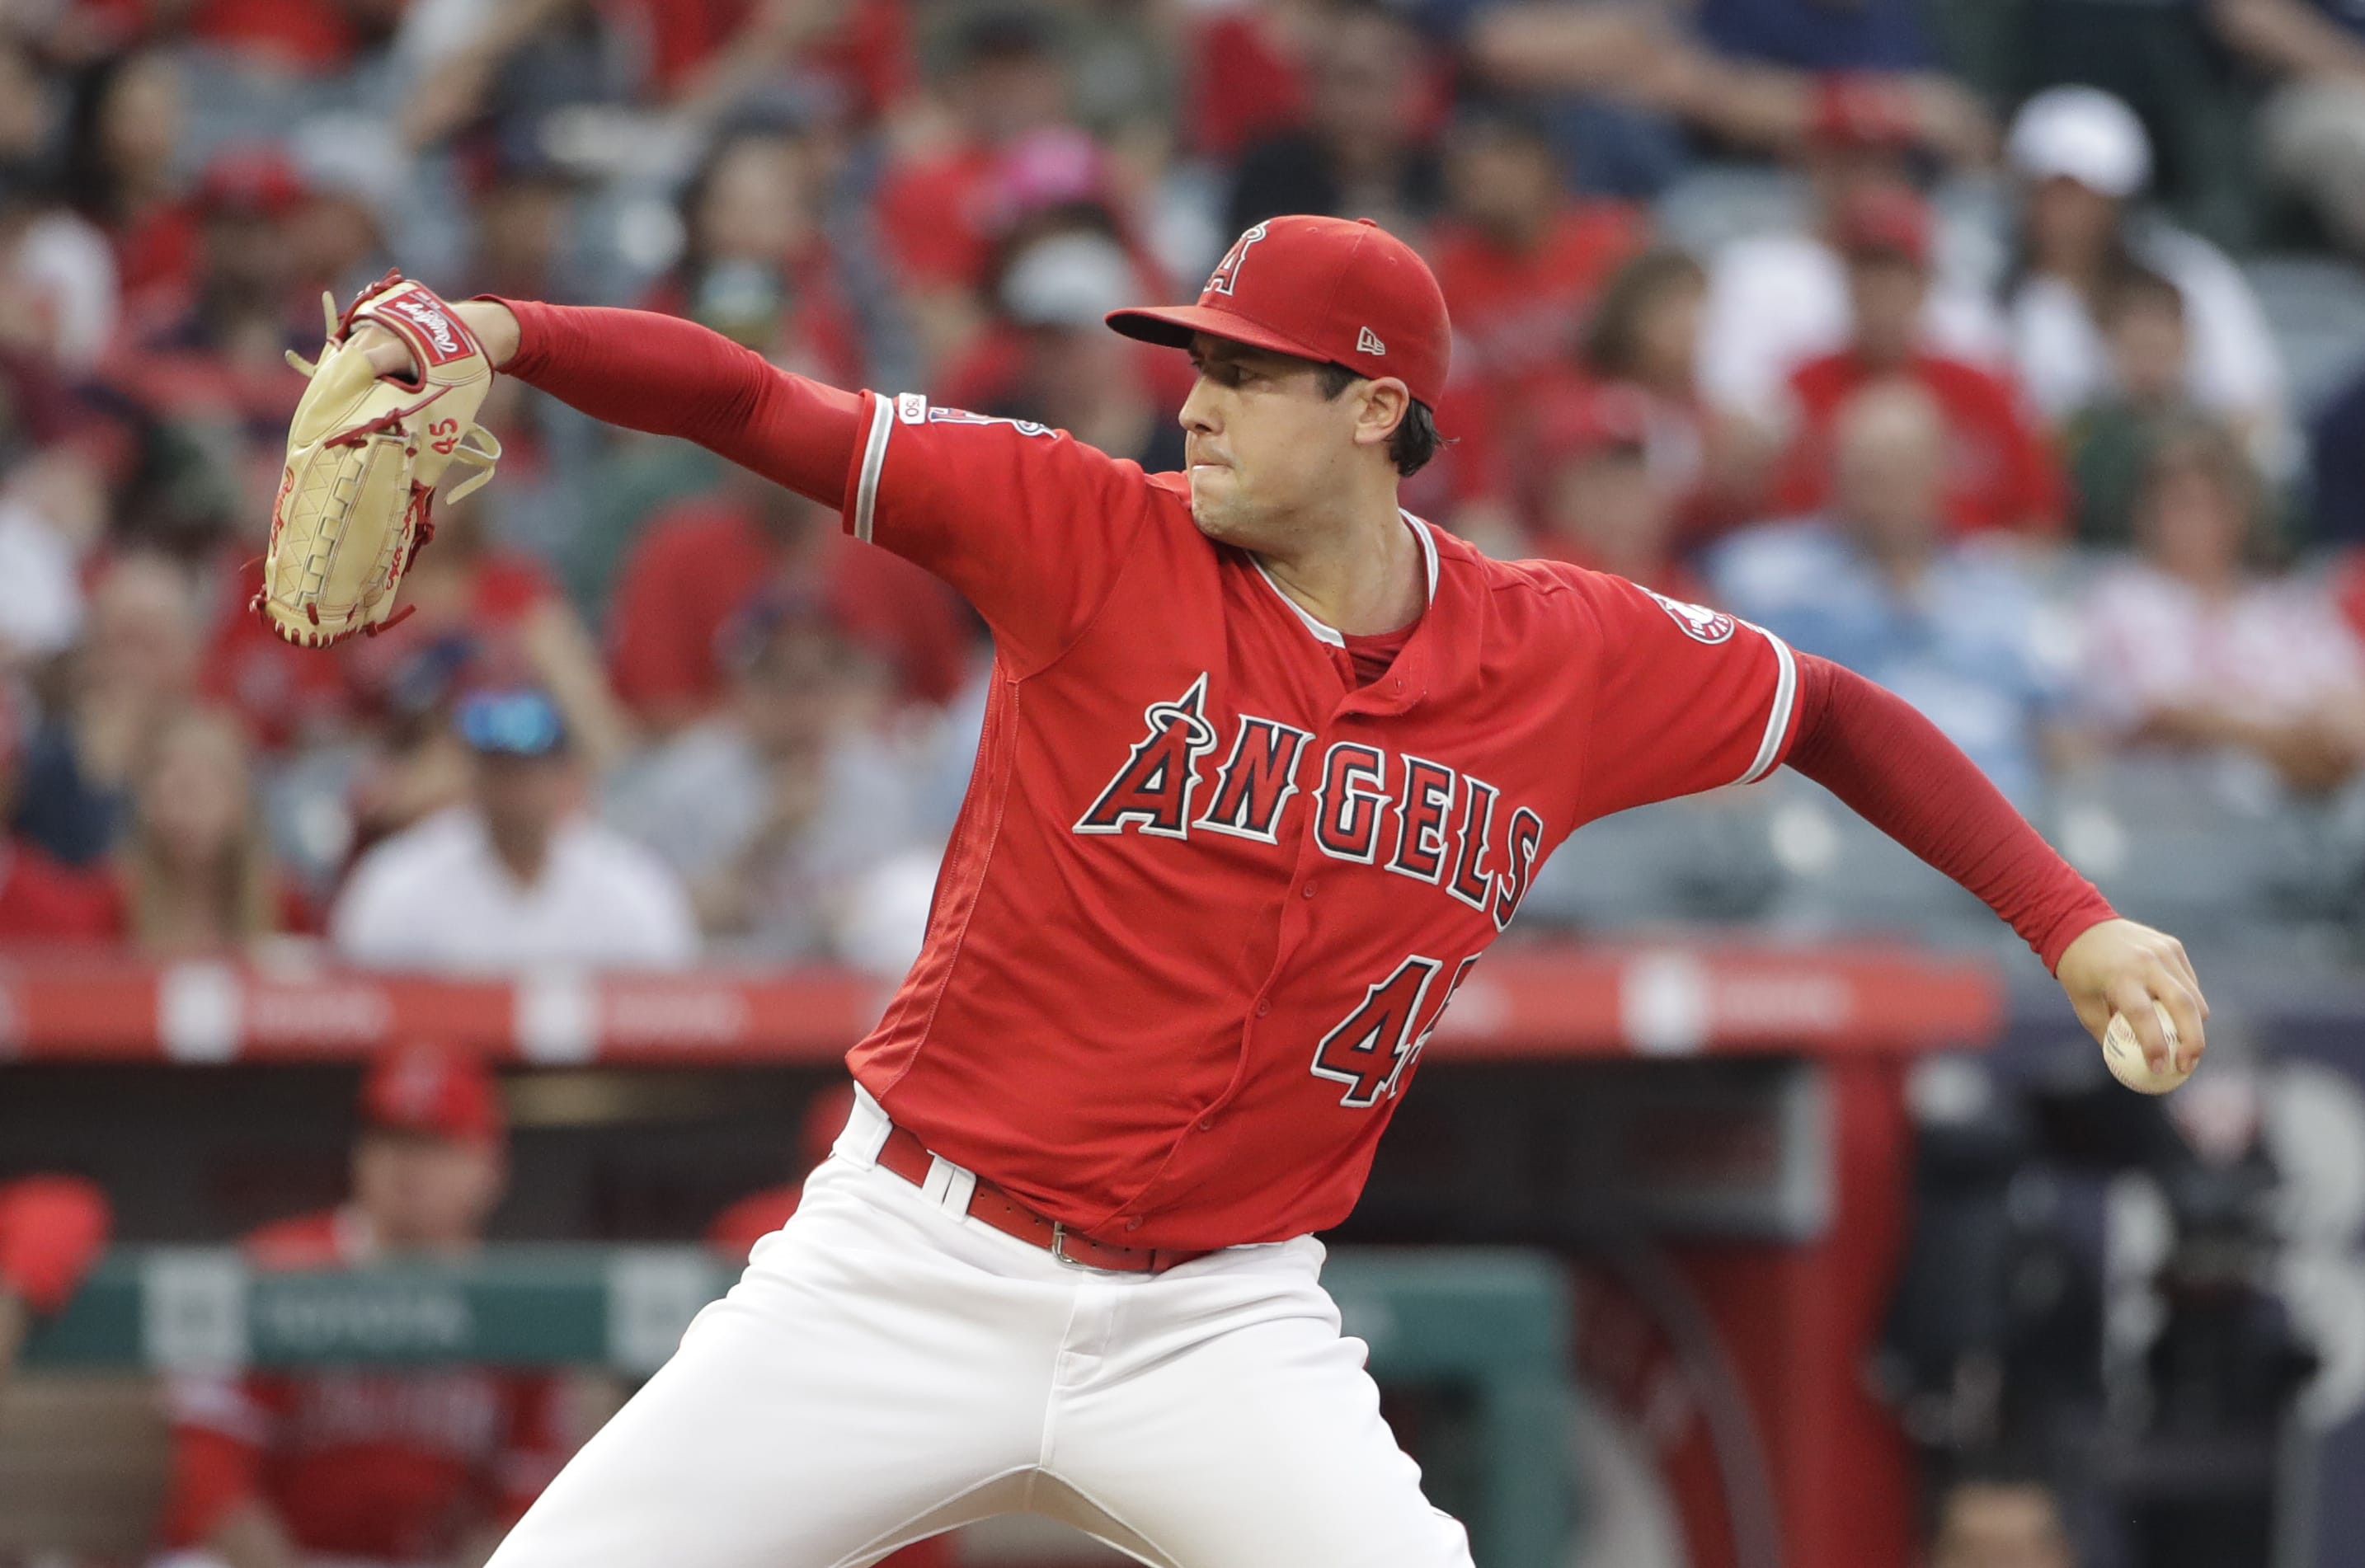 Los Angeles Angels starting pitcher Tyler Skaggs throws to the Oakland Athletics during the first inning of a baseball game Saturday, June 29, 2019, in Anaheim, Calif.